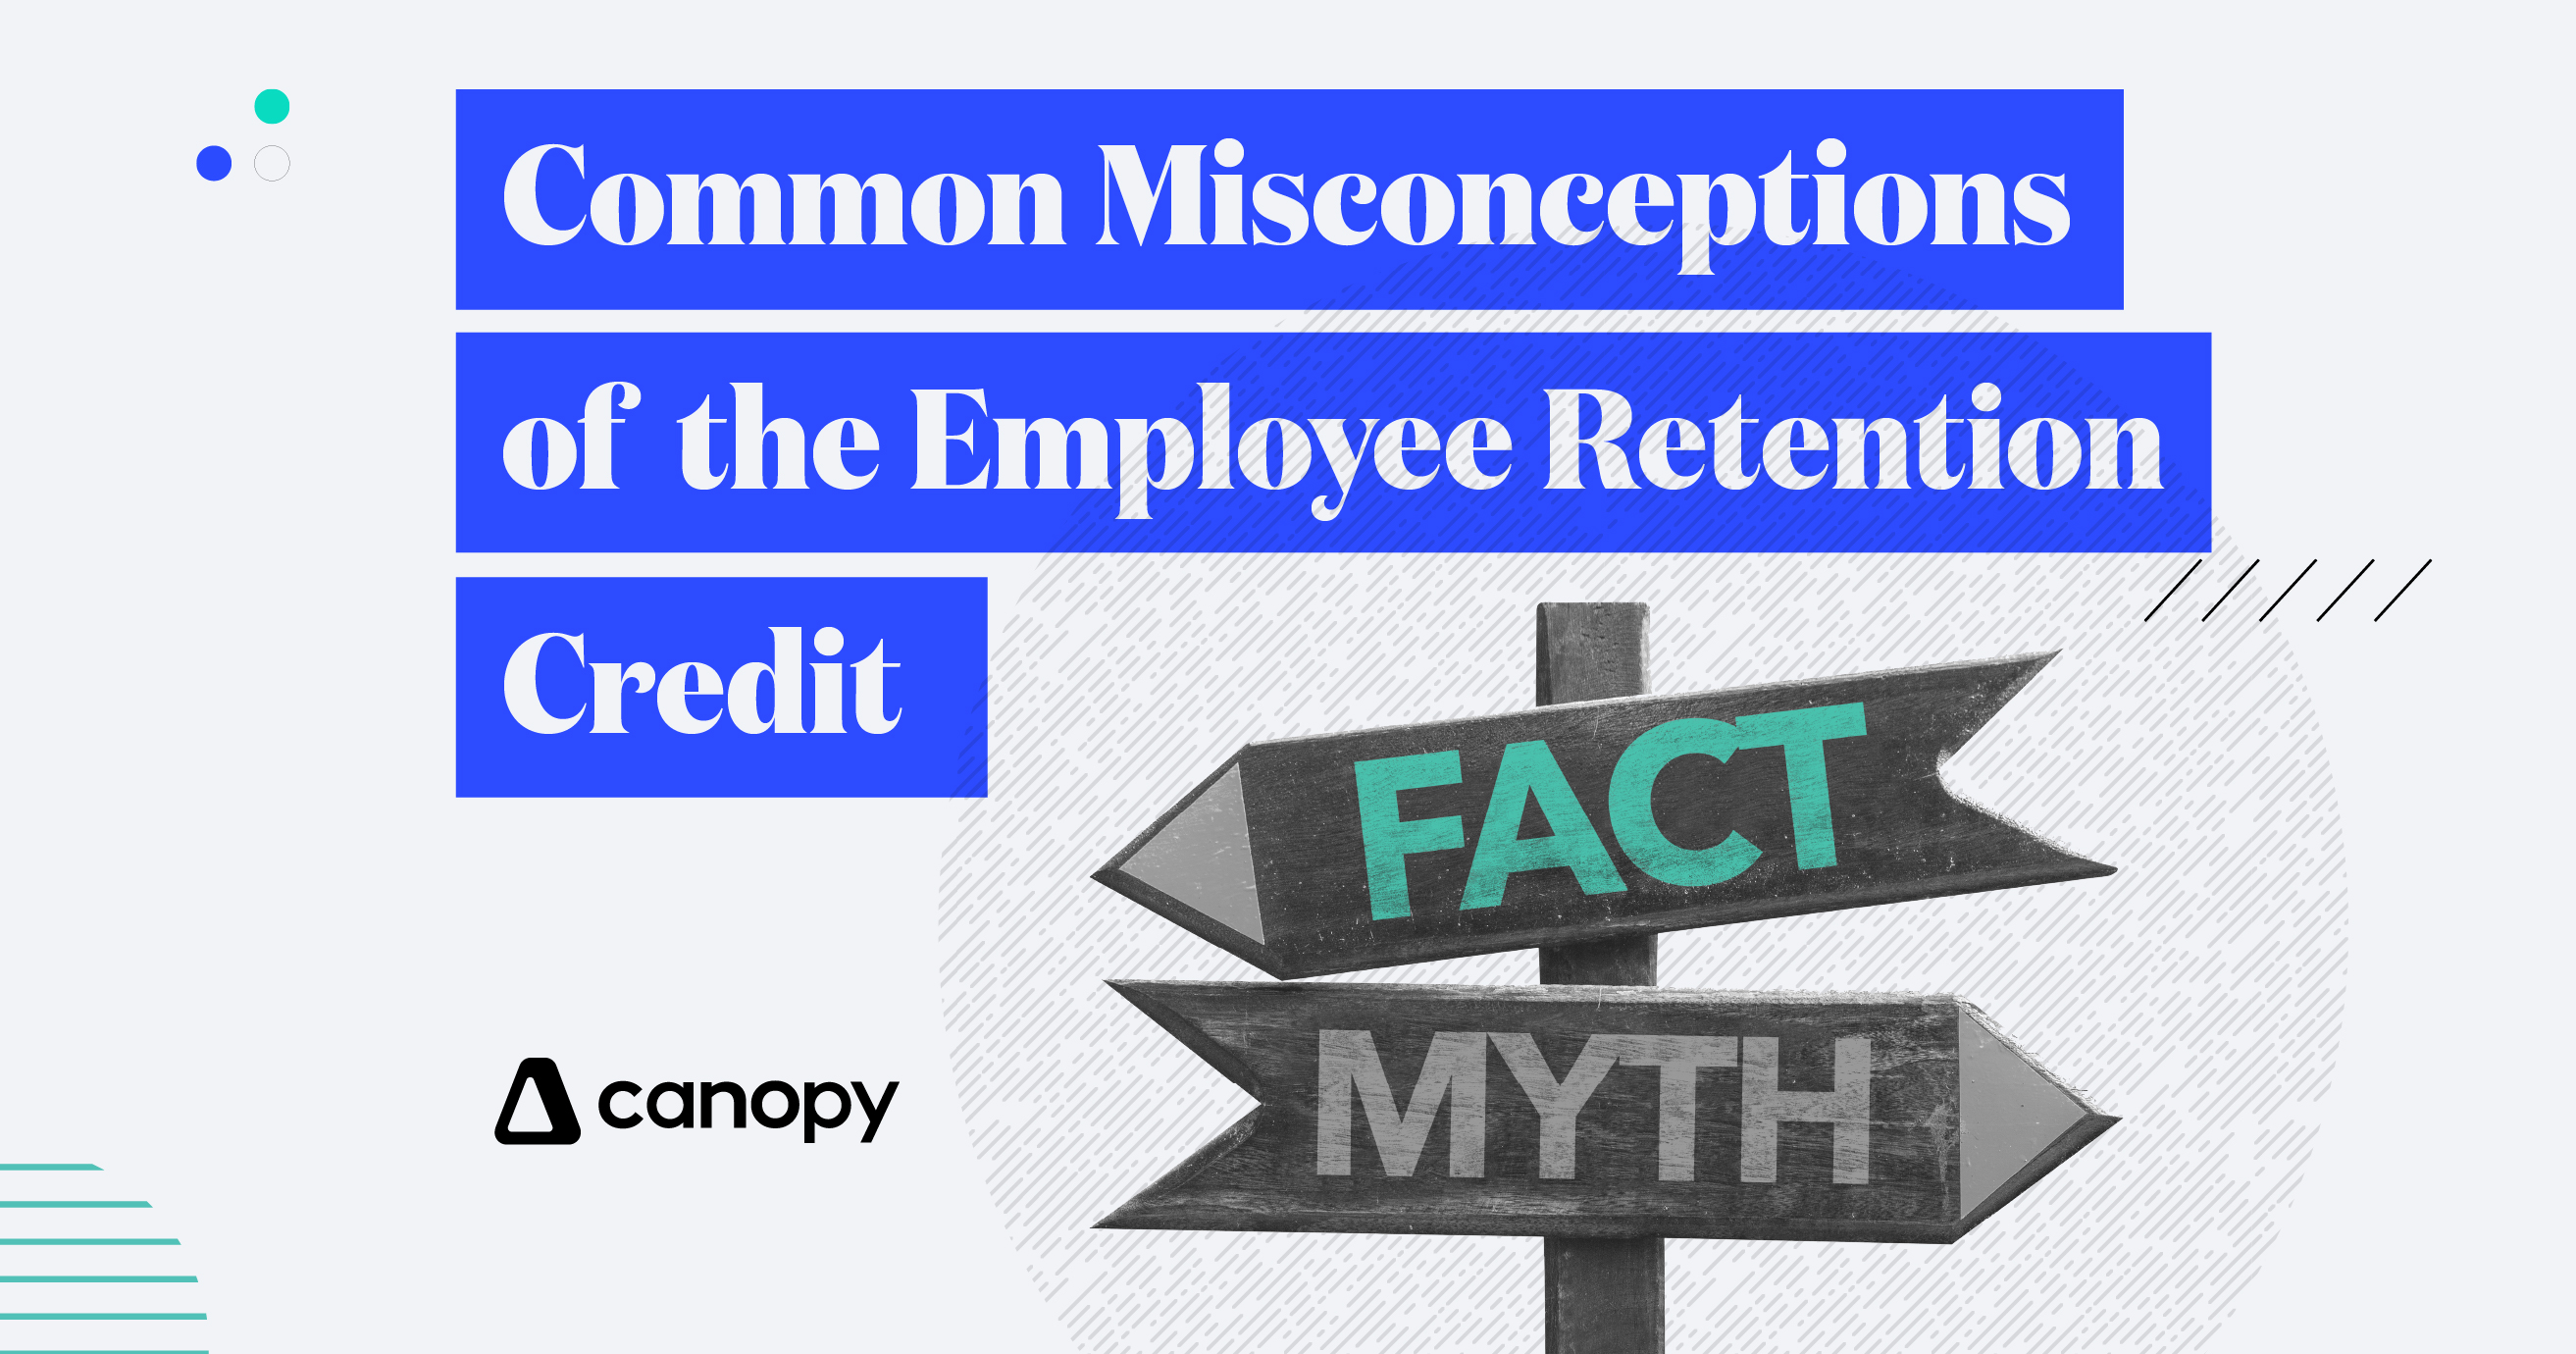 Common Misconceptions of the Employee Retention Credit